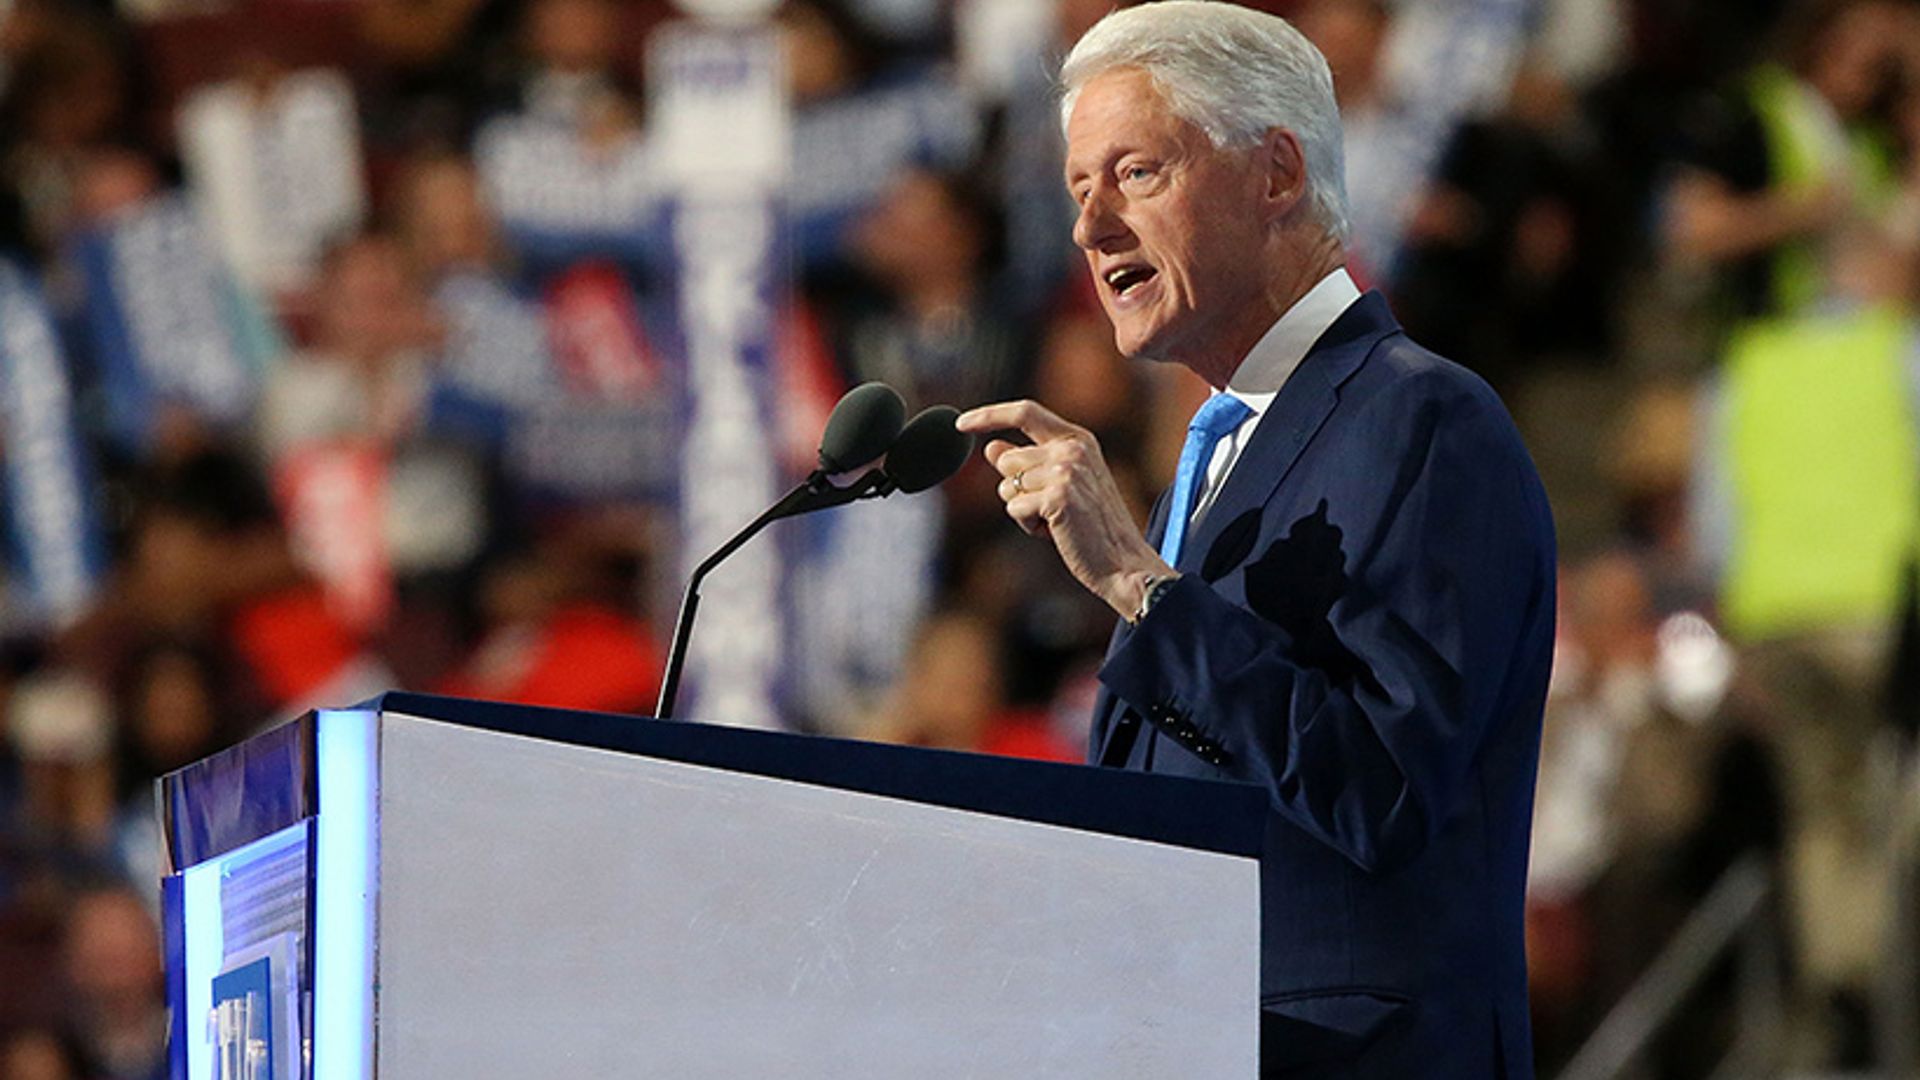 Bill Clinton delivers highly personal speech in support of wife and 'best friend' Hillary